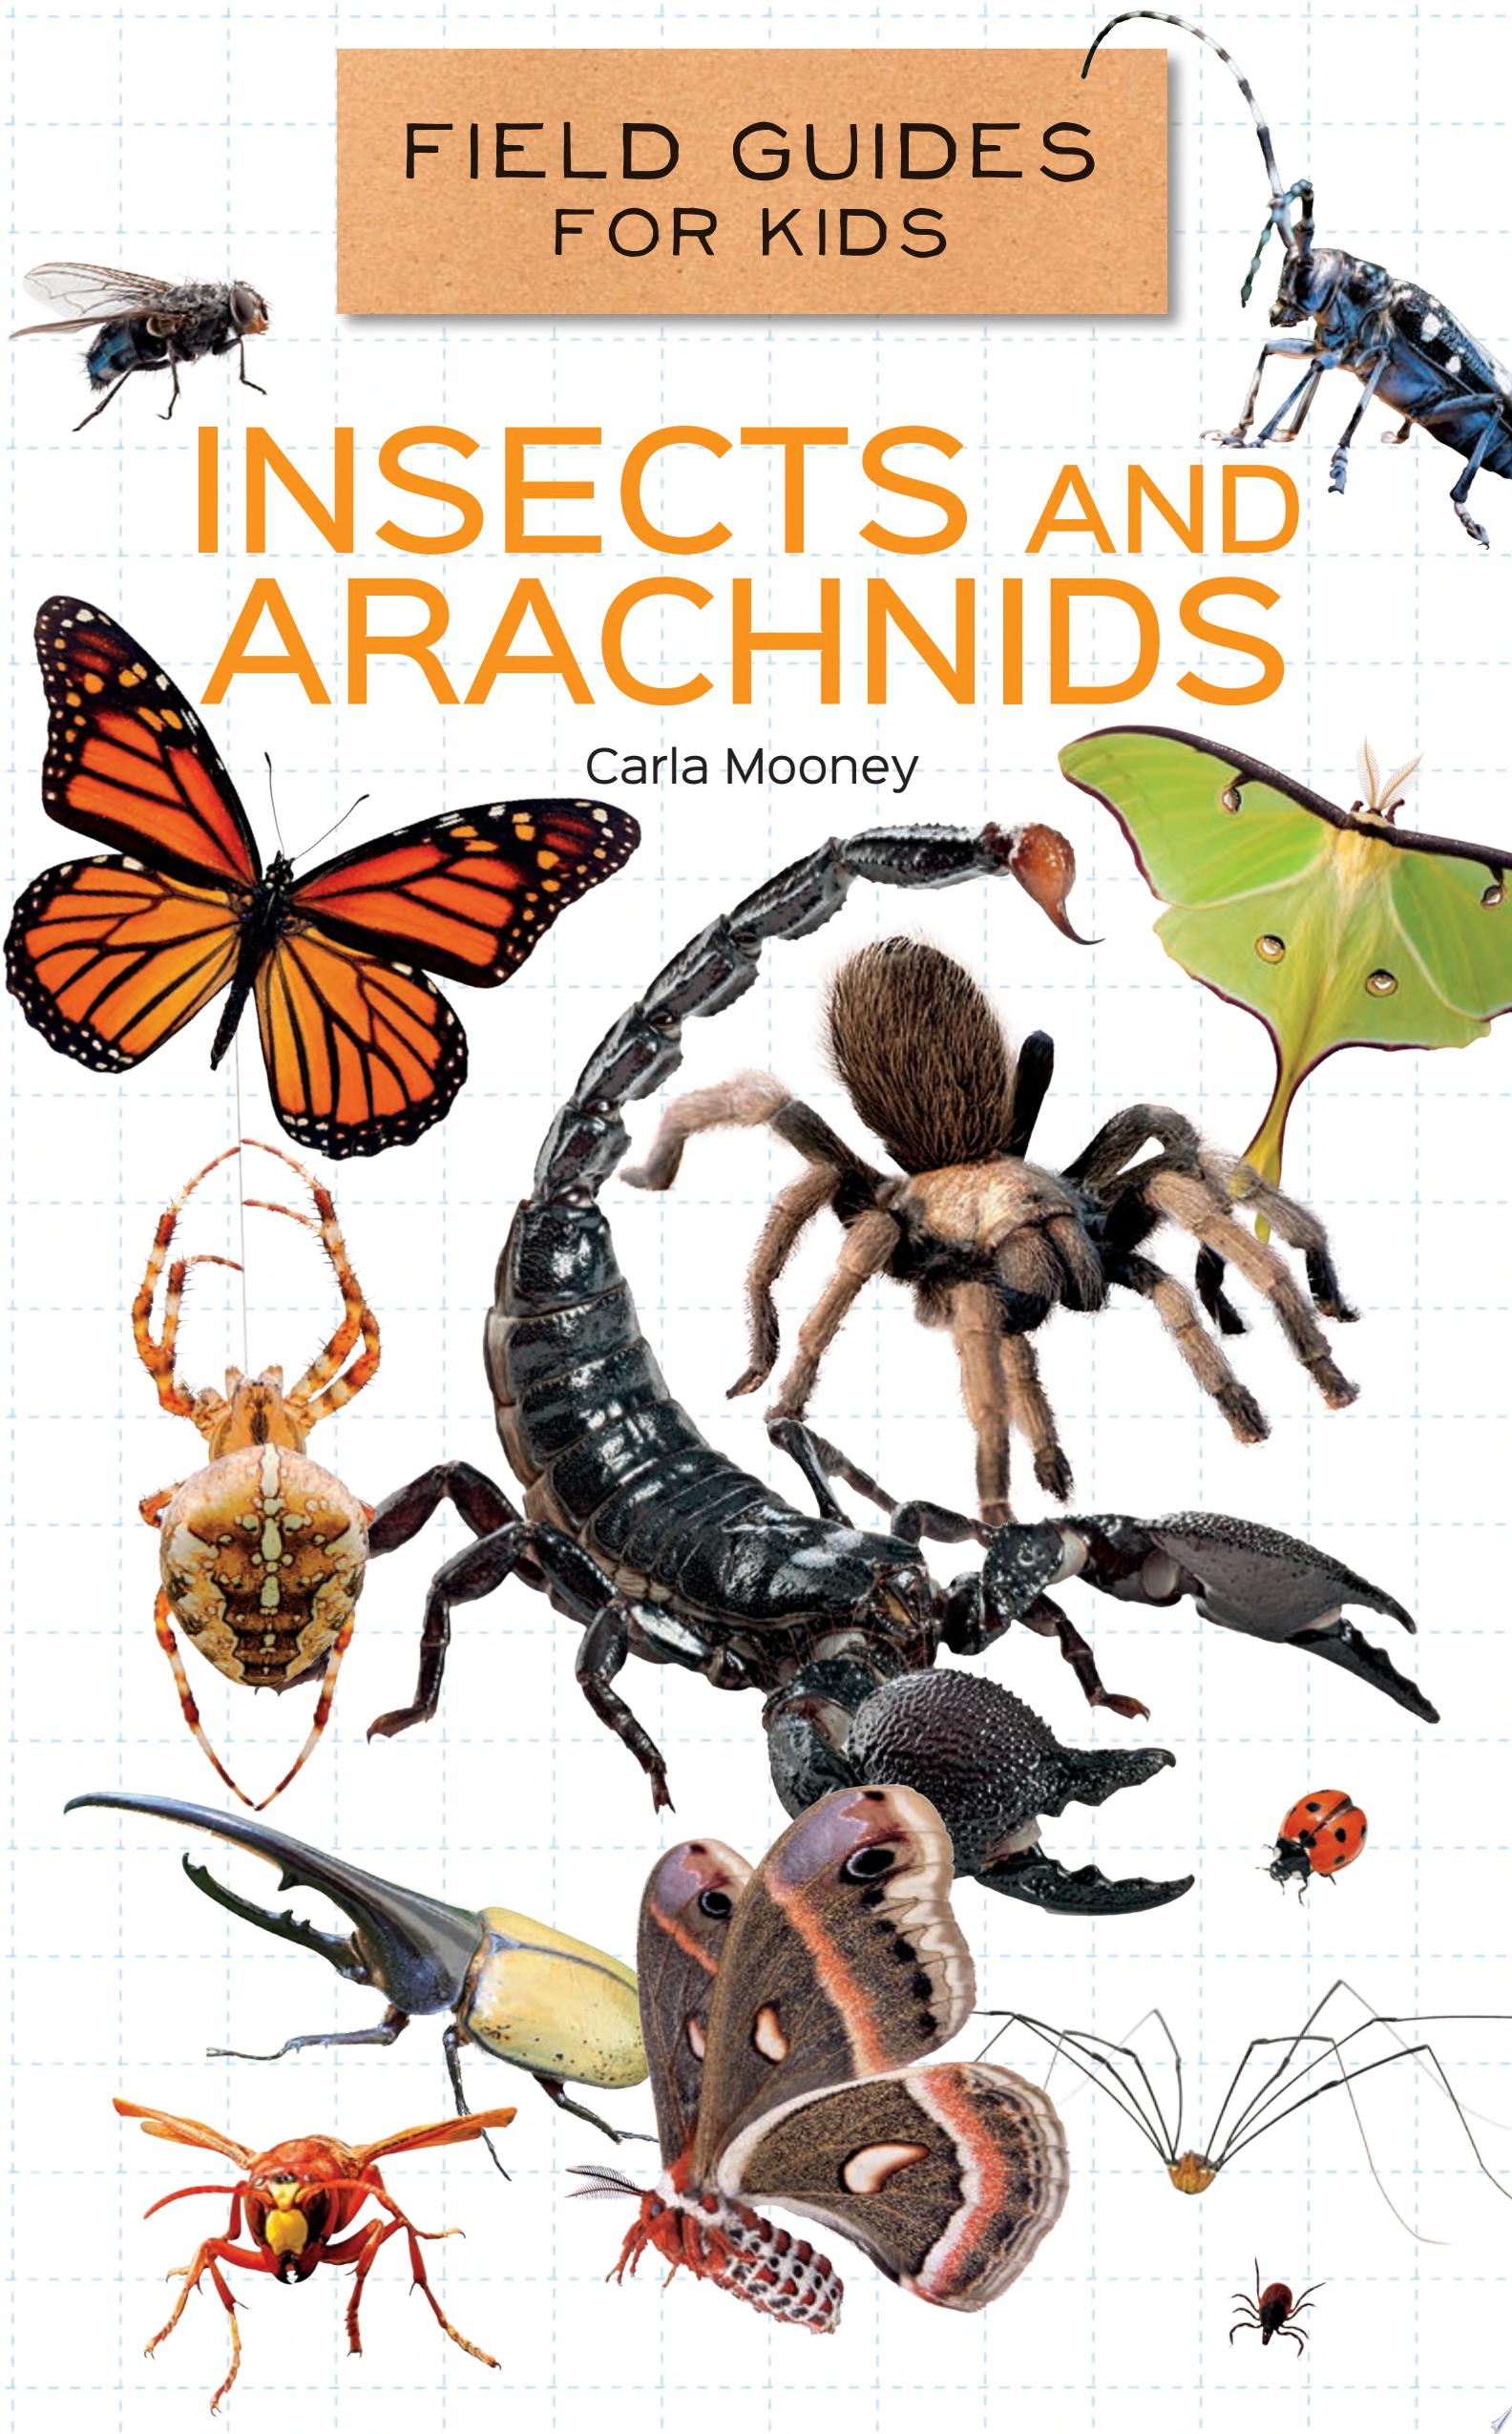 Image for "Insects and Arachnids"